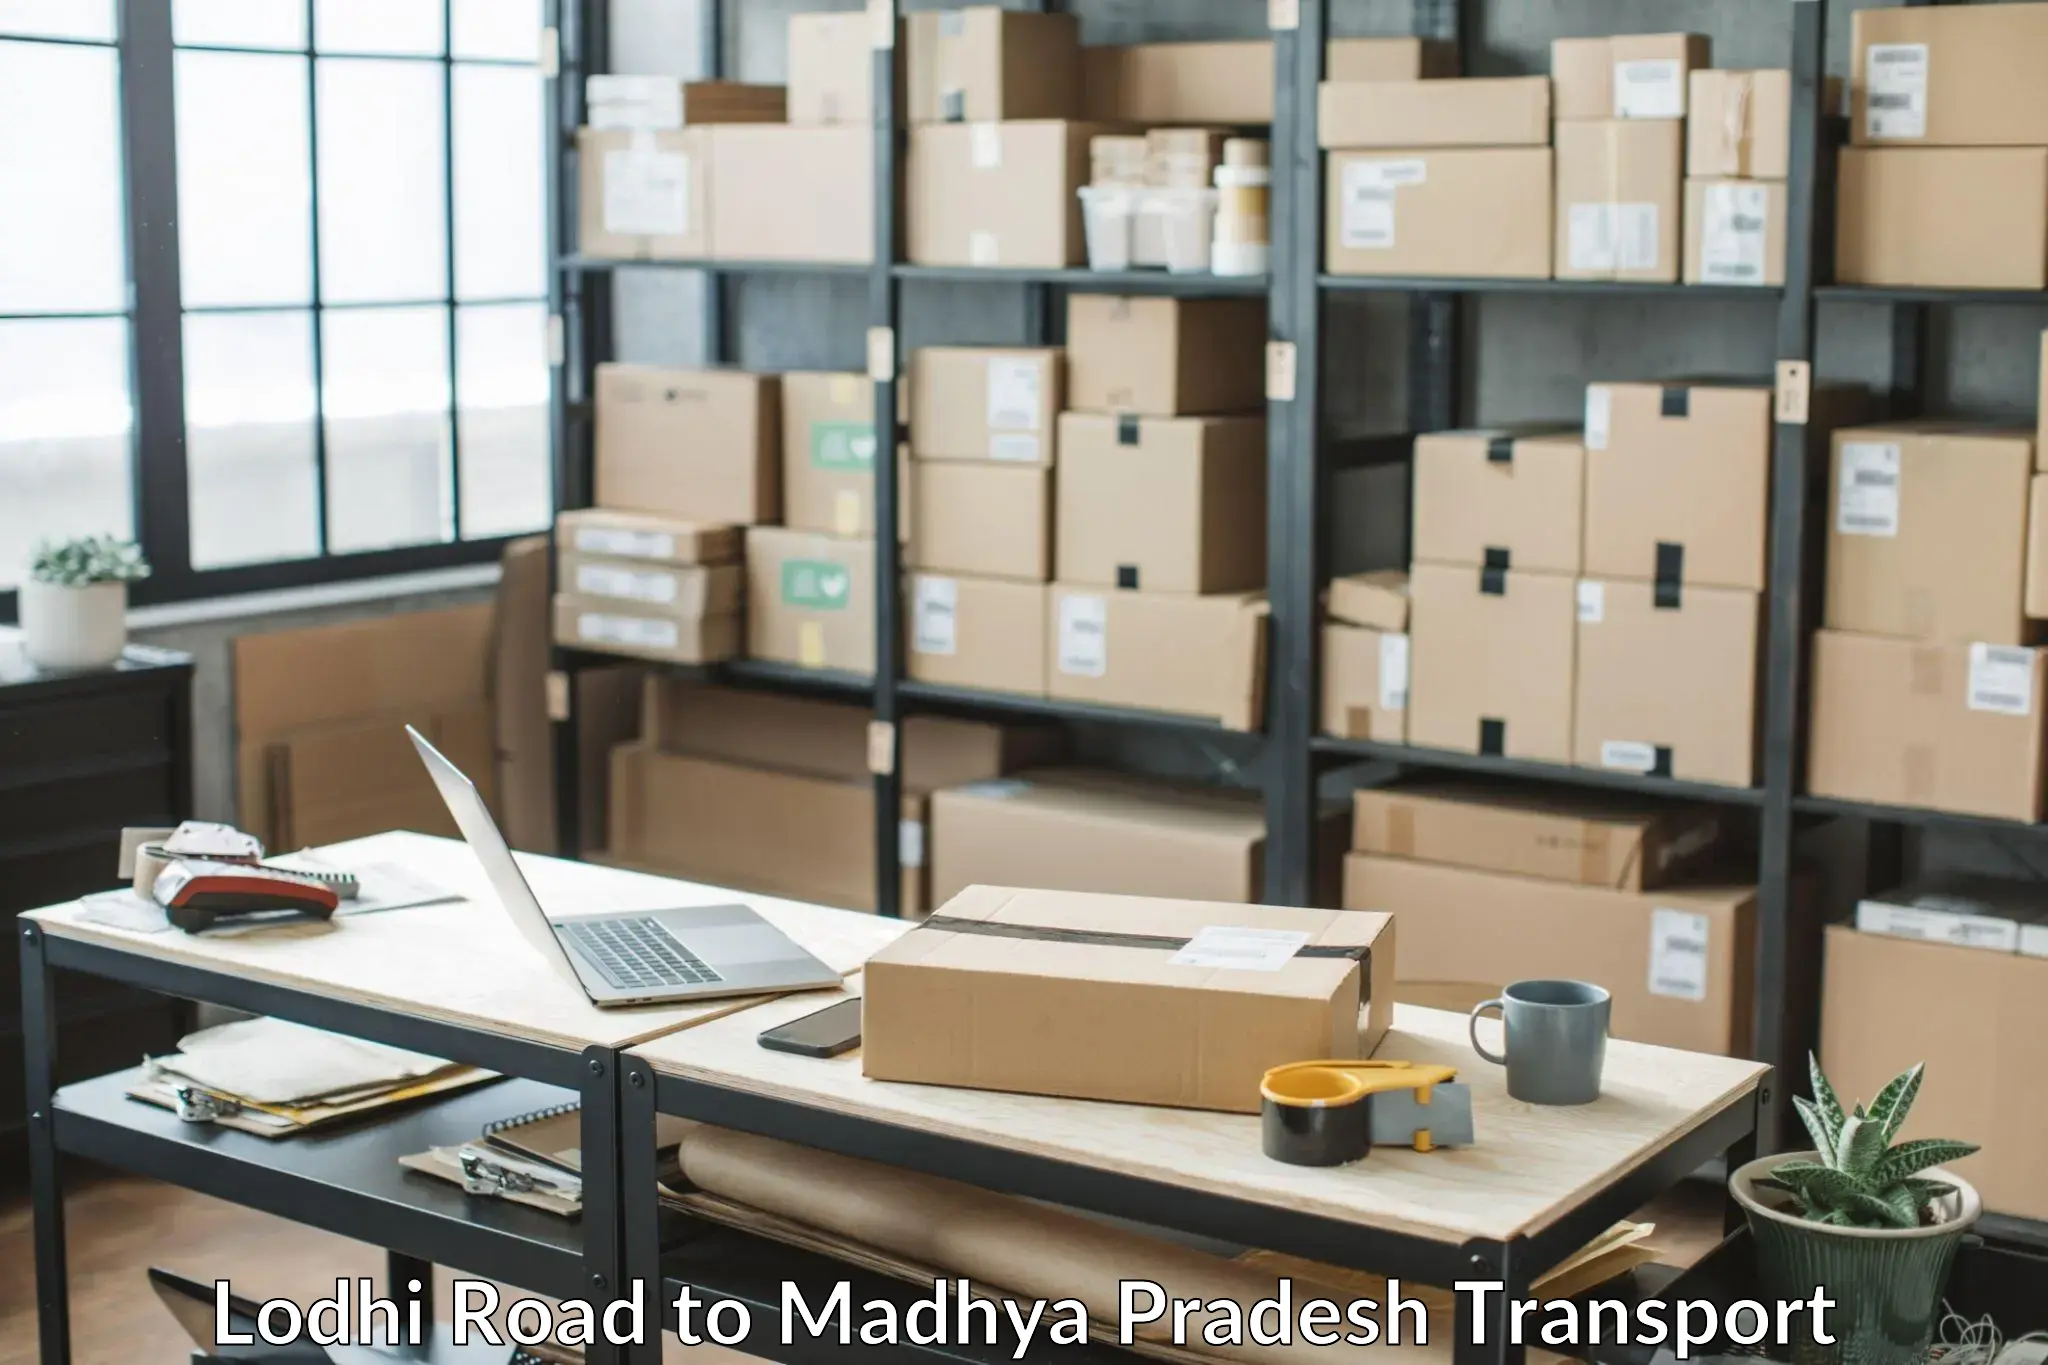 Commercial transport service Lodhi Road to Gwalior